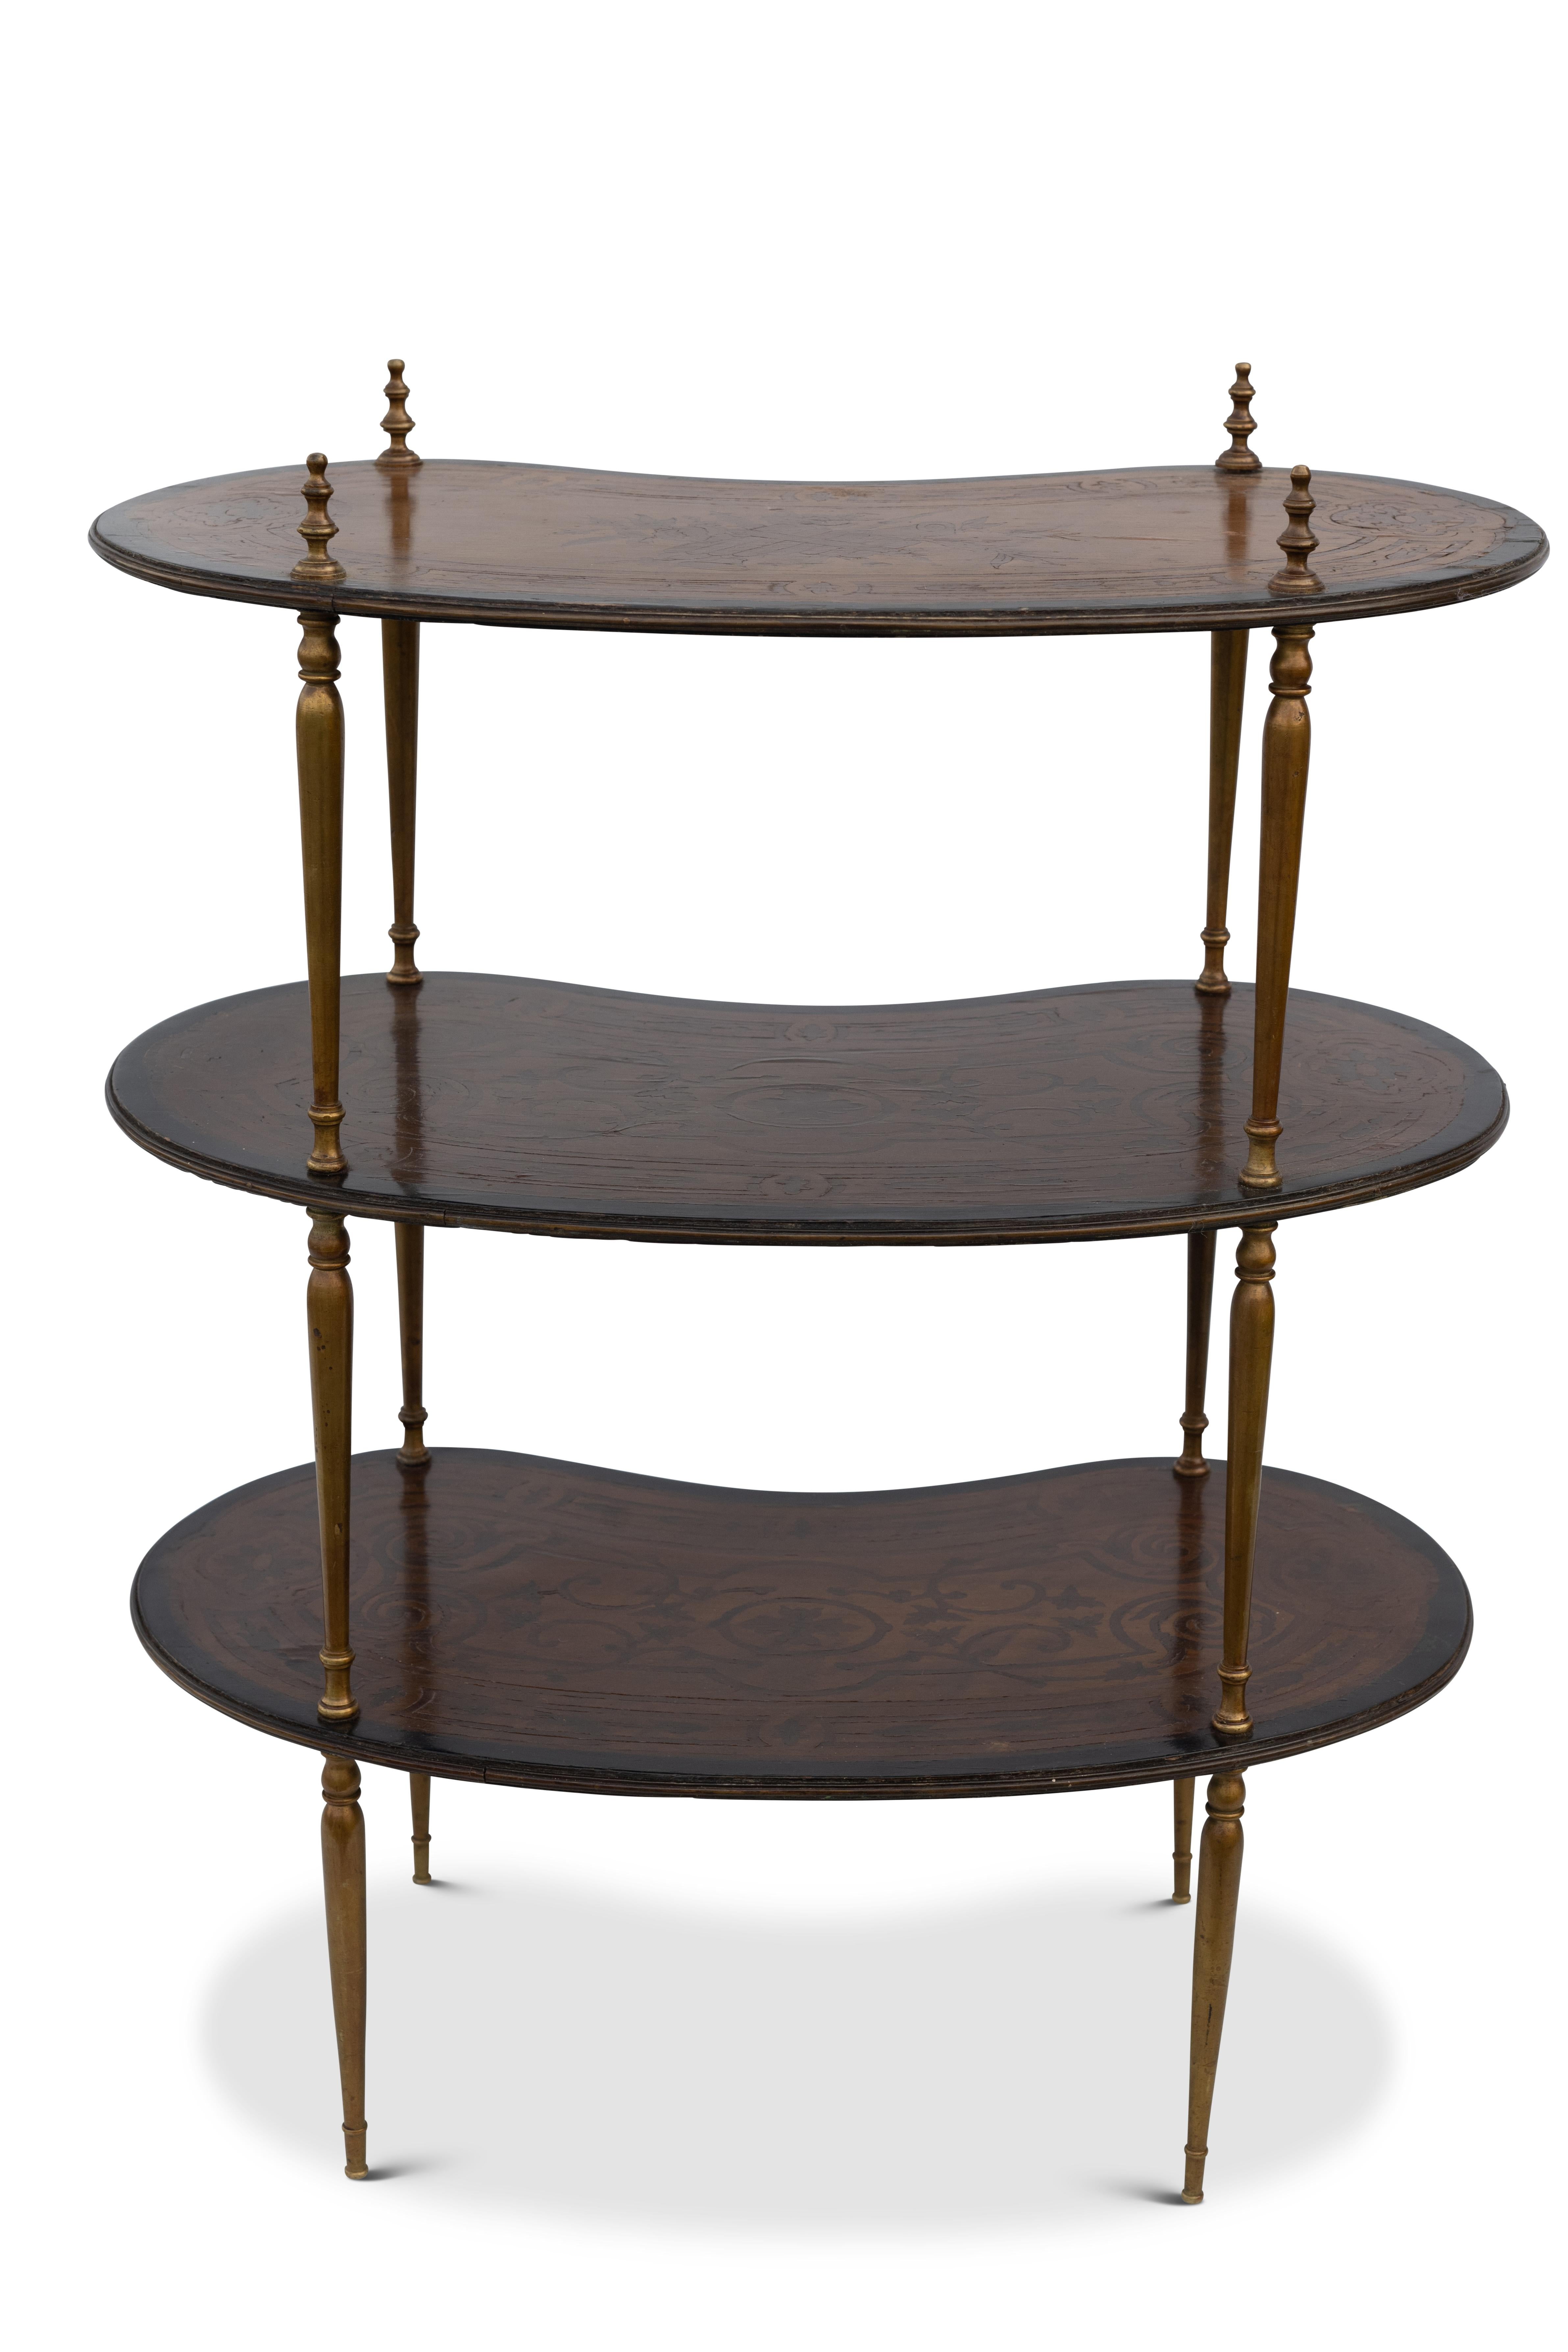 Ebonized Victorian Continental Three-Tier Kidney Shaped Brass & Marquetry Étagére 1880's For Sale